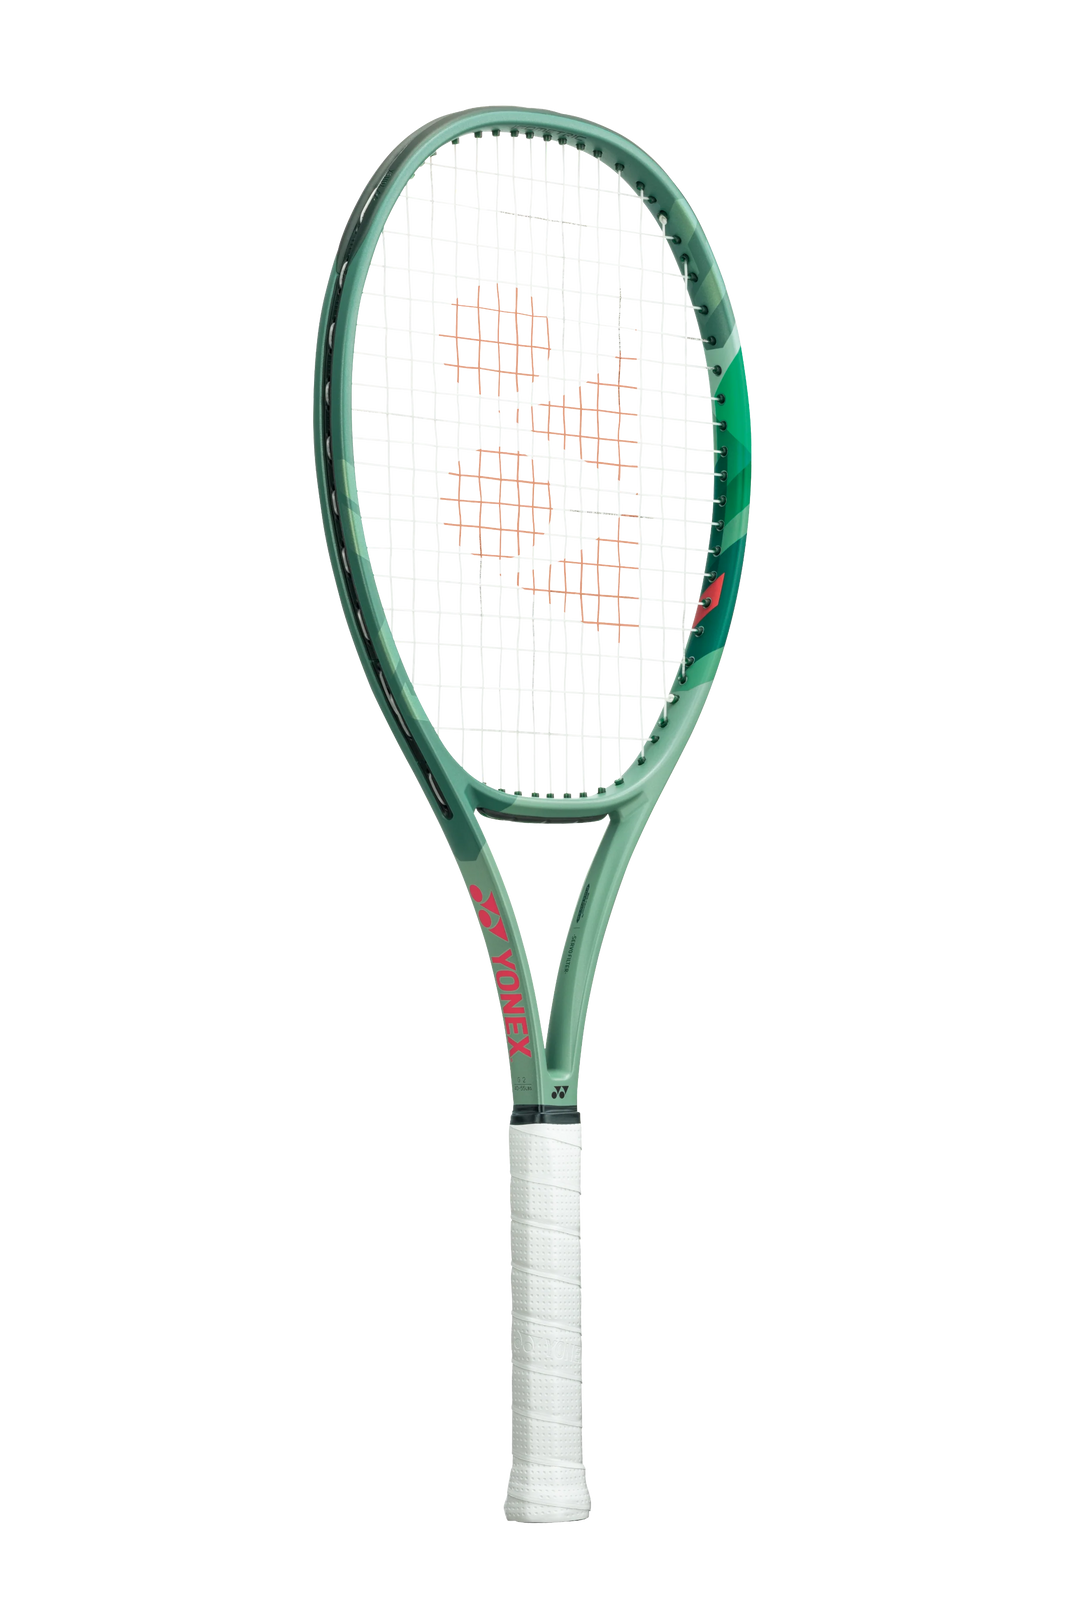 Affordable tennis string reel For Sale, Sports Equipment